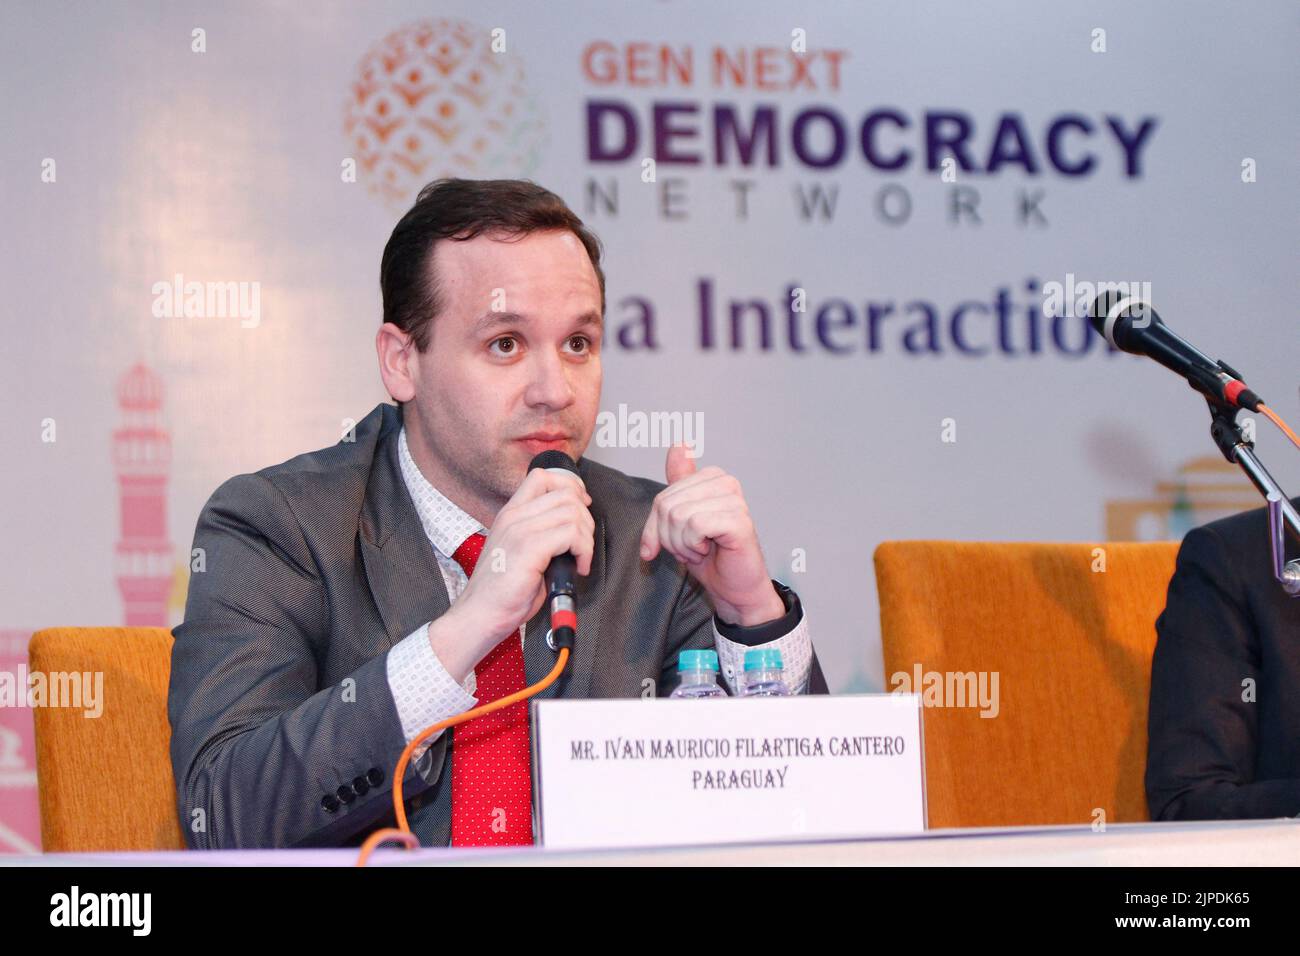 New Delhi, India, August 17th, 2022, Delegate from Paraguay Ivan Mauricio Filartiga Cantero 4th batch of "Gen-Next Democracy Network Programme"addresses media during a media interaction at ICCR in New Delhi, India on August 17th, 2022. As a part of Azadi Ka Amrit Mahotsav commemorating 75 years of India's independence and her glorious history, culture, and achievement, ICCR hosted 4th batch of "Gen-Next Democracy Network Programme" with young leaders from 5 countries namely Paraguay, Uganda, Thailand, Mauritius and Czech Republic. Photo by Akash Anshuman/ABACAPRESS.COM Stock Photo